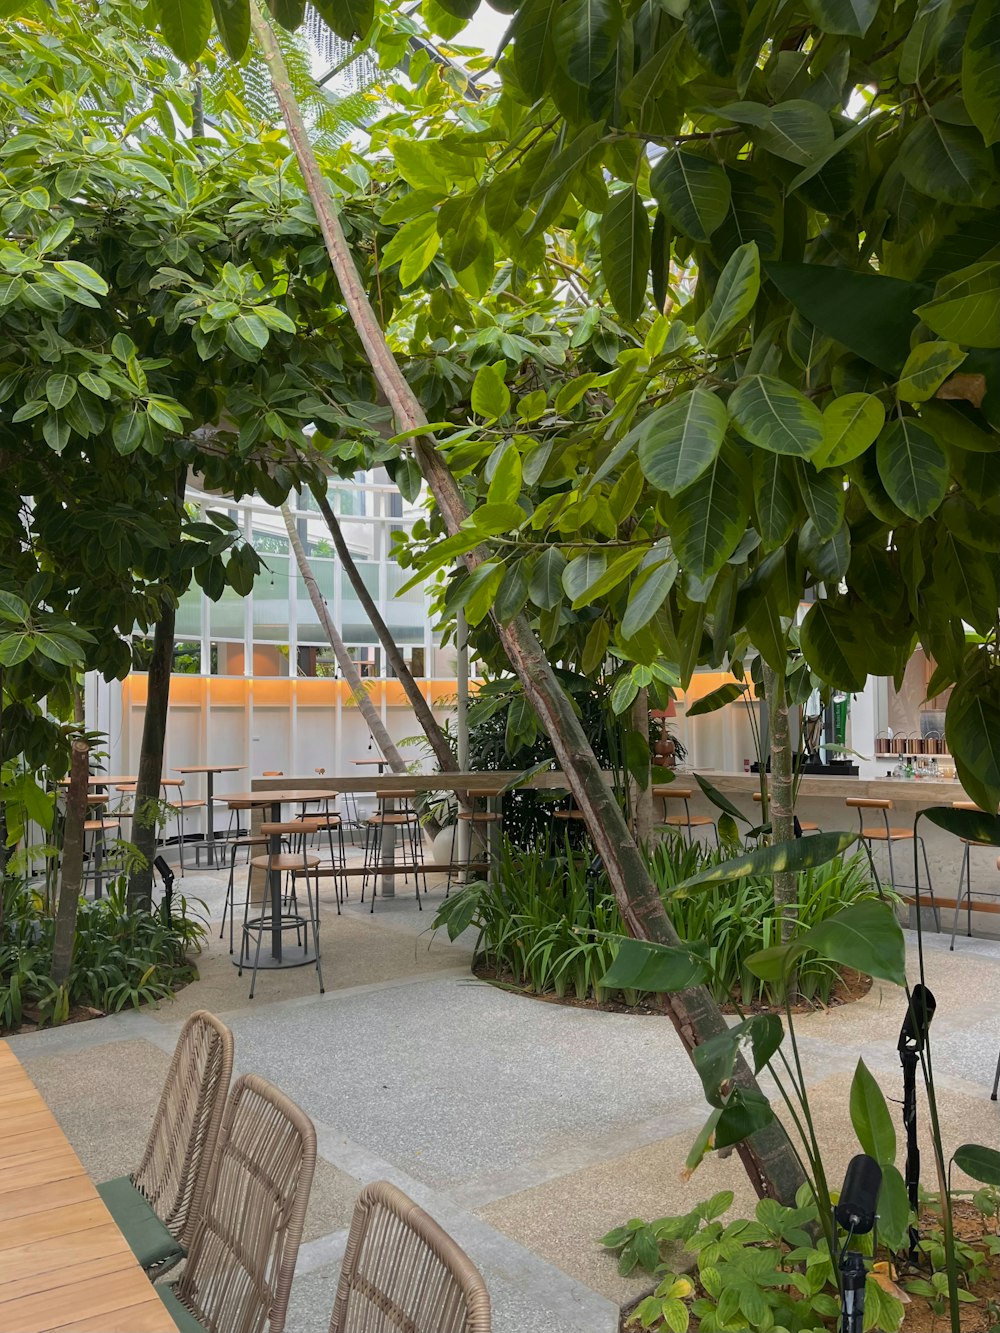 a restaurant with tables and chairs surrounded by trees